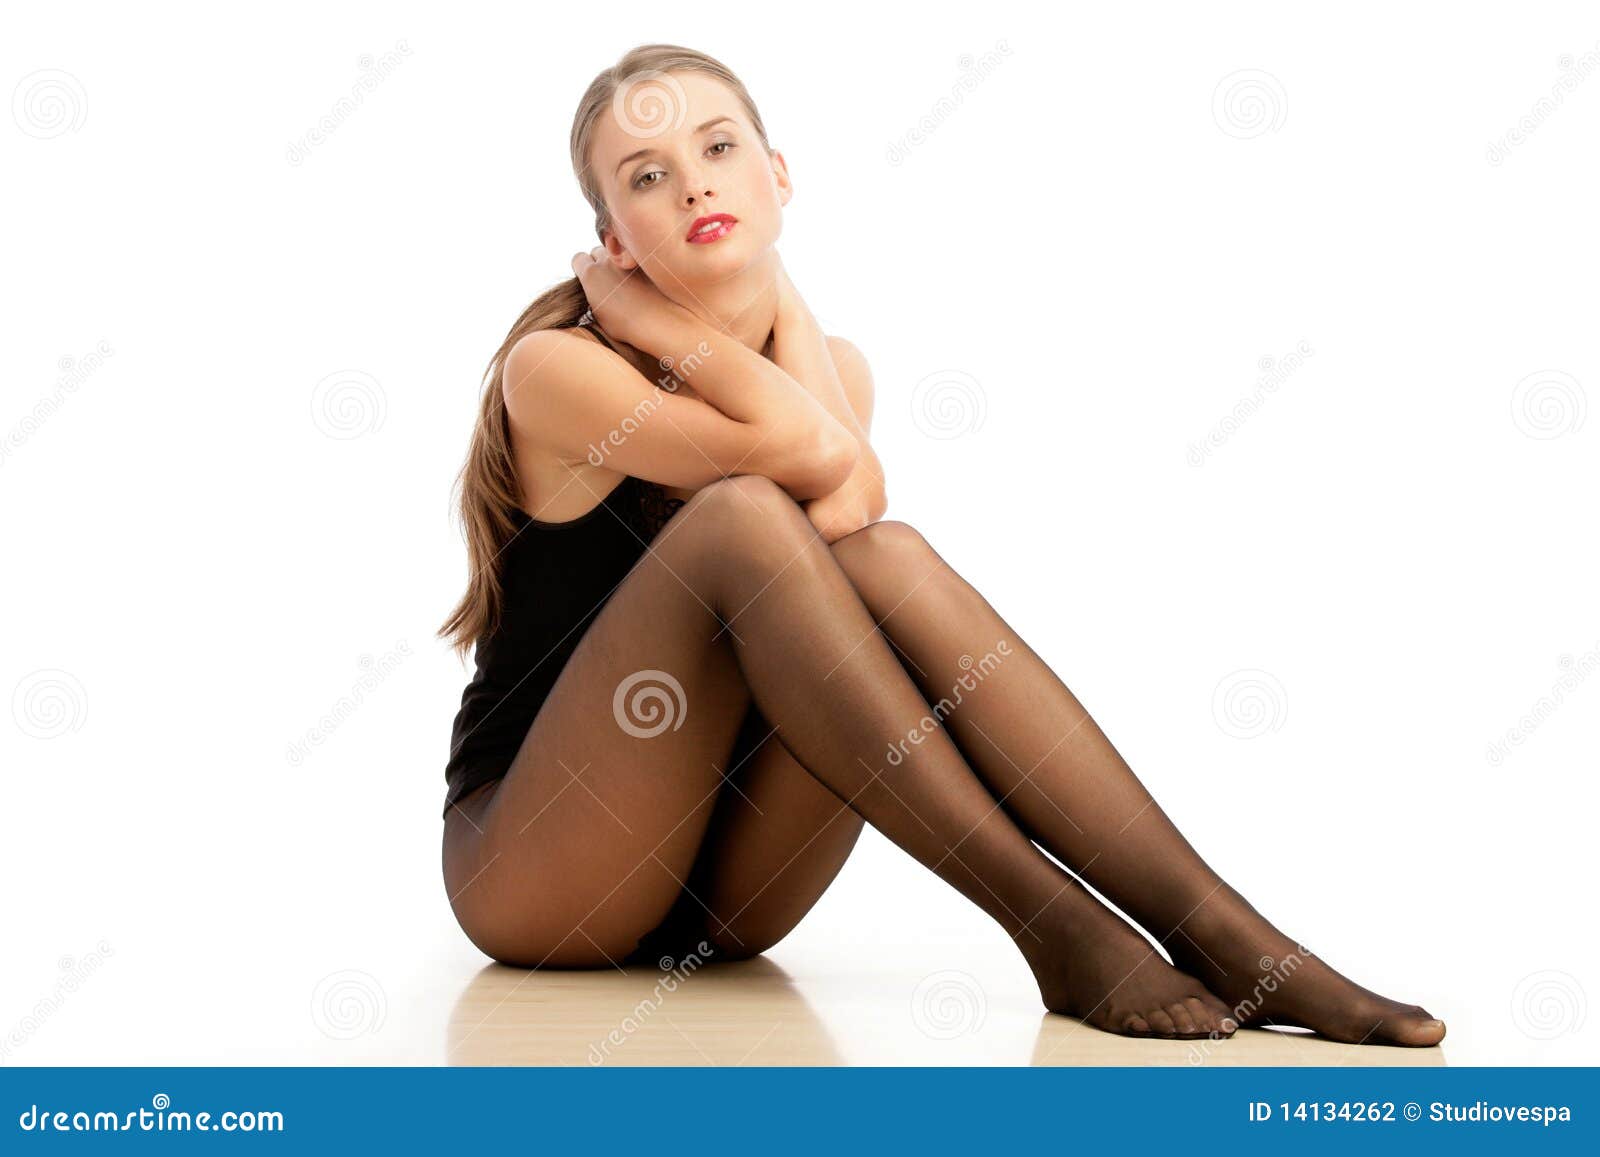 dave dieterich recommends show me women in pantyhose pic